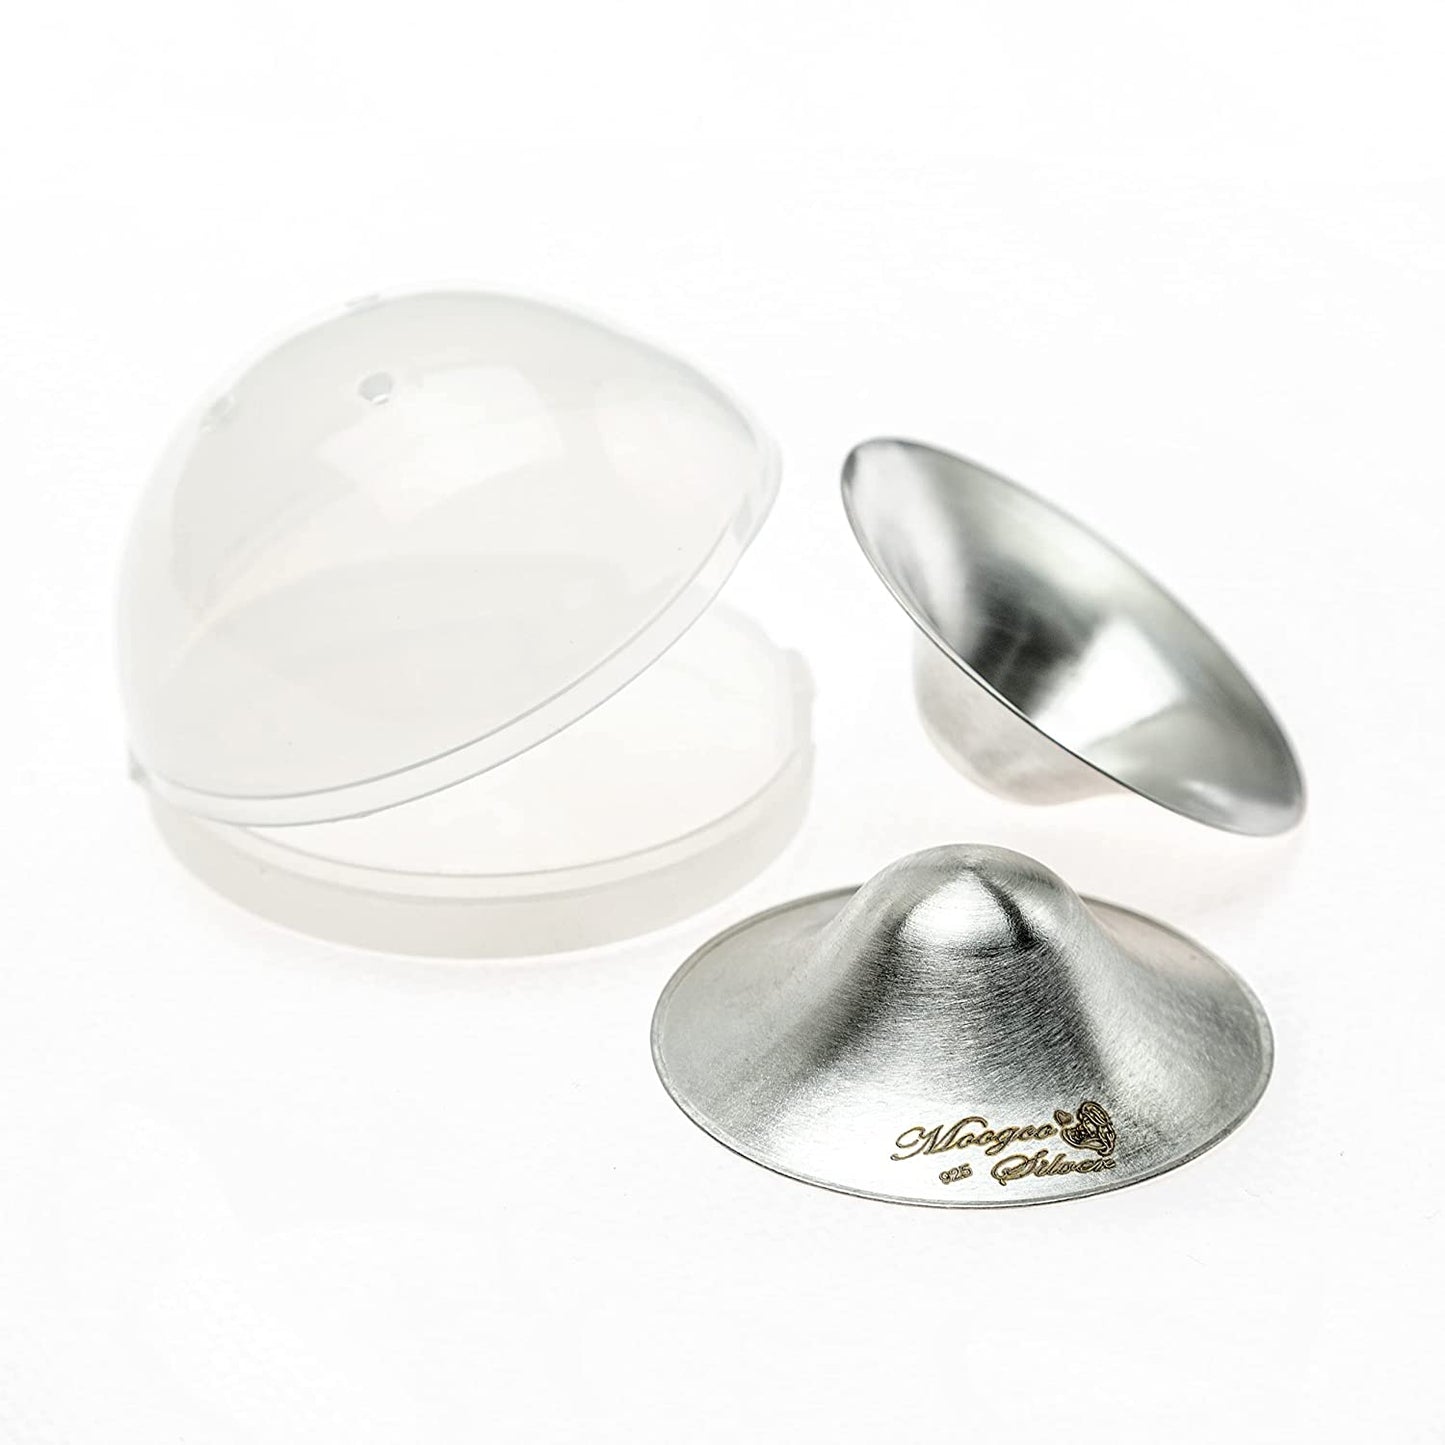 Premium Silver Nursing Cups for Comfortable and Convenient Breastfeeding